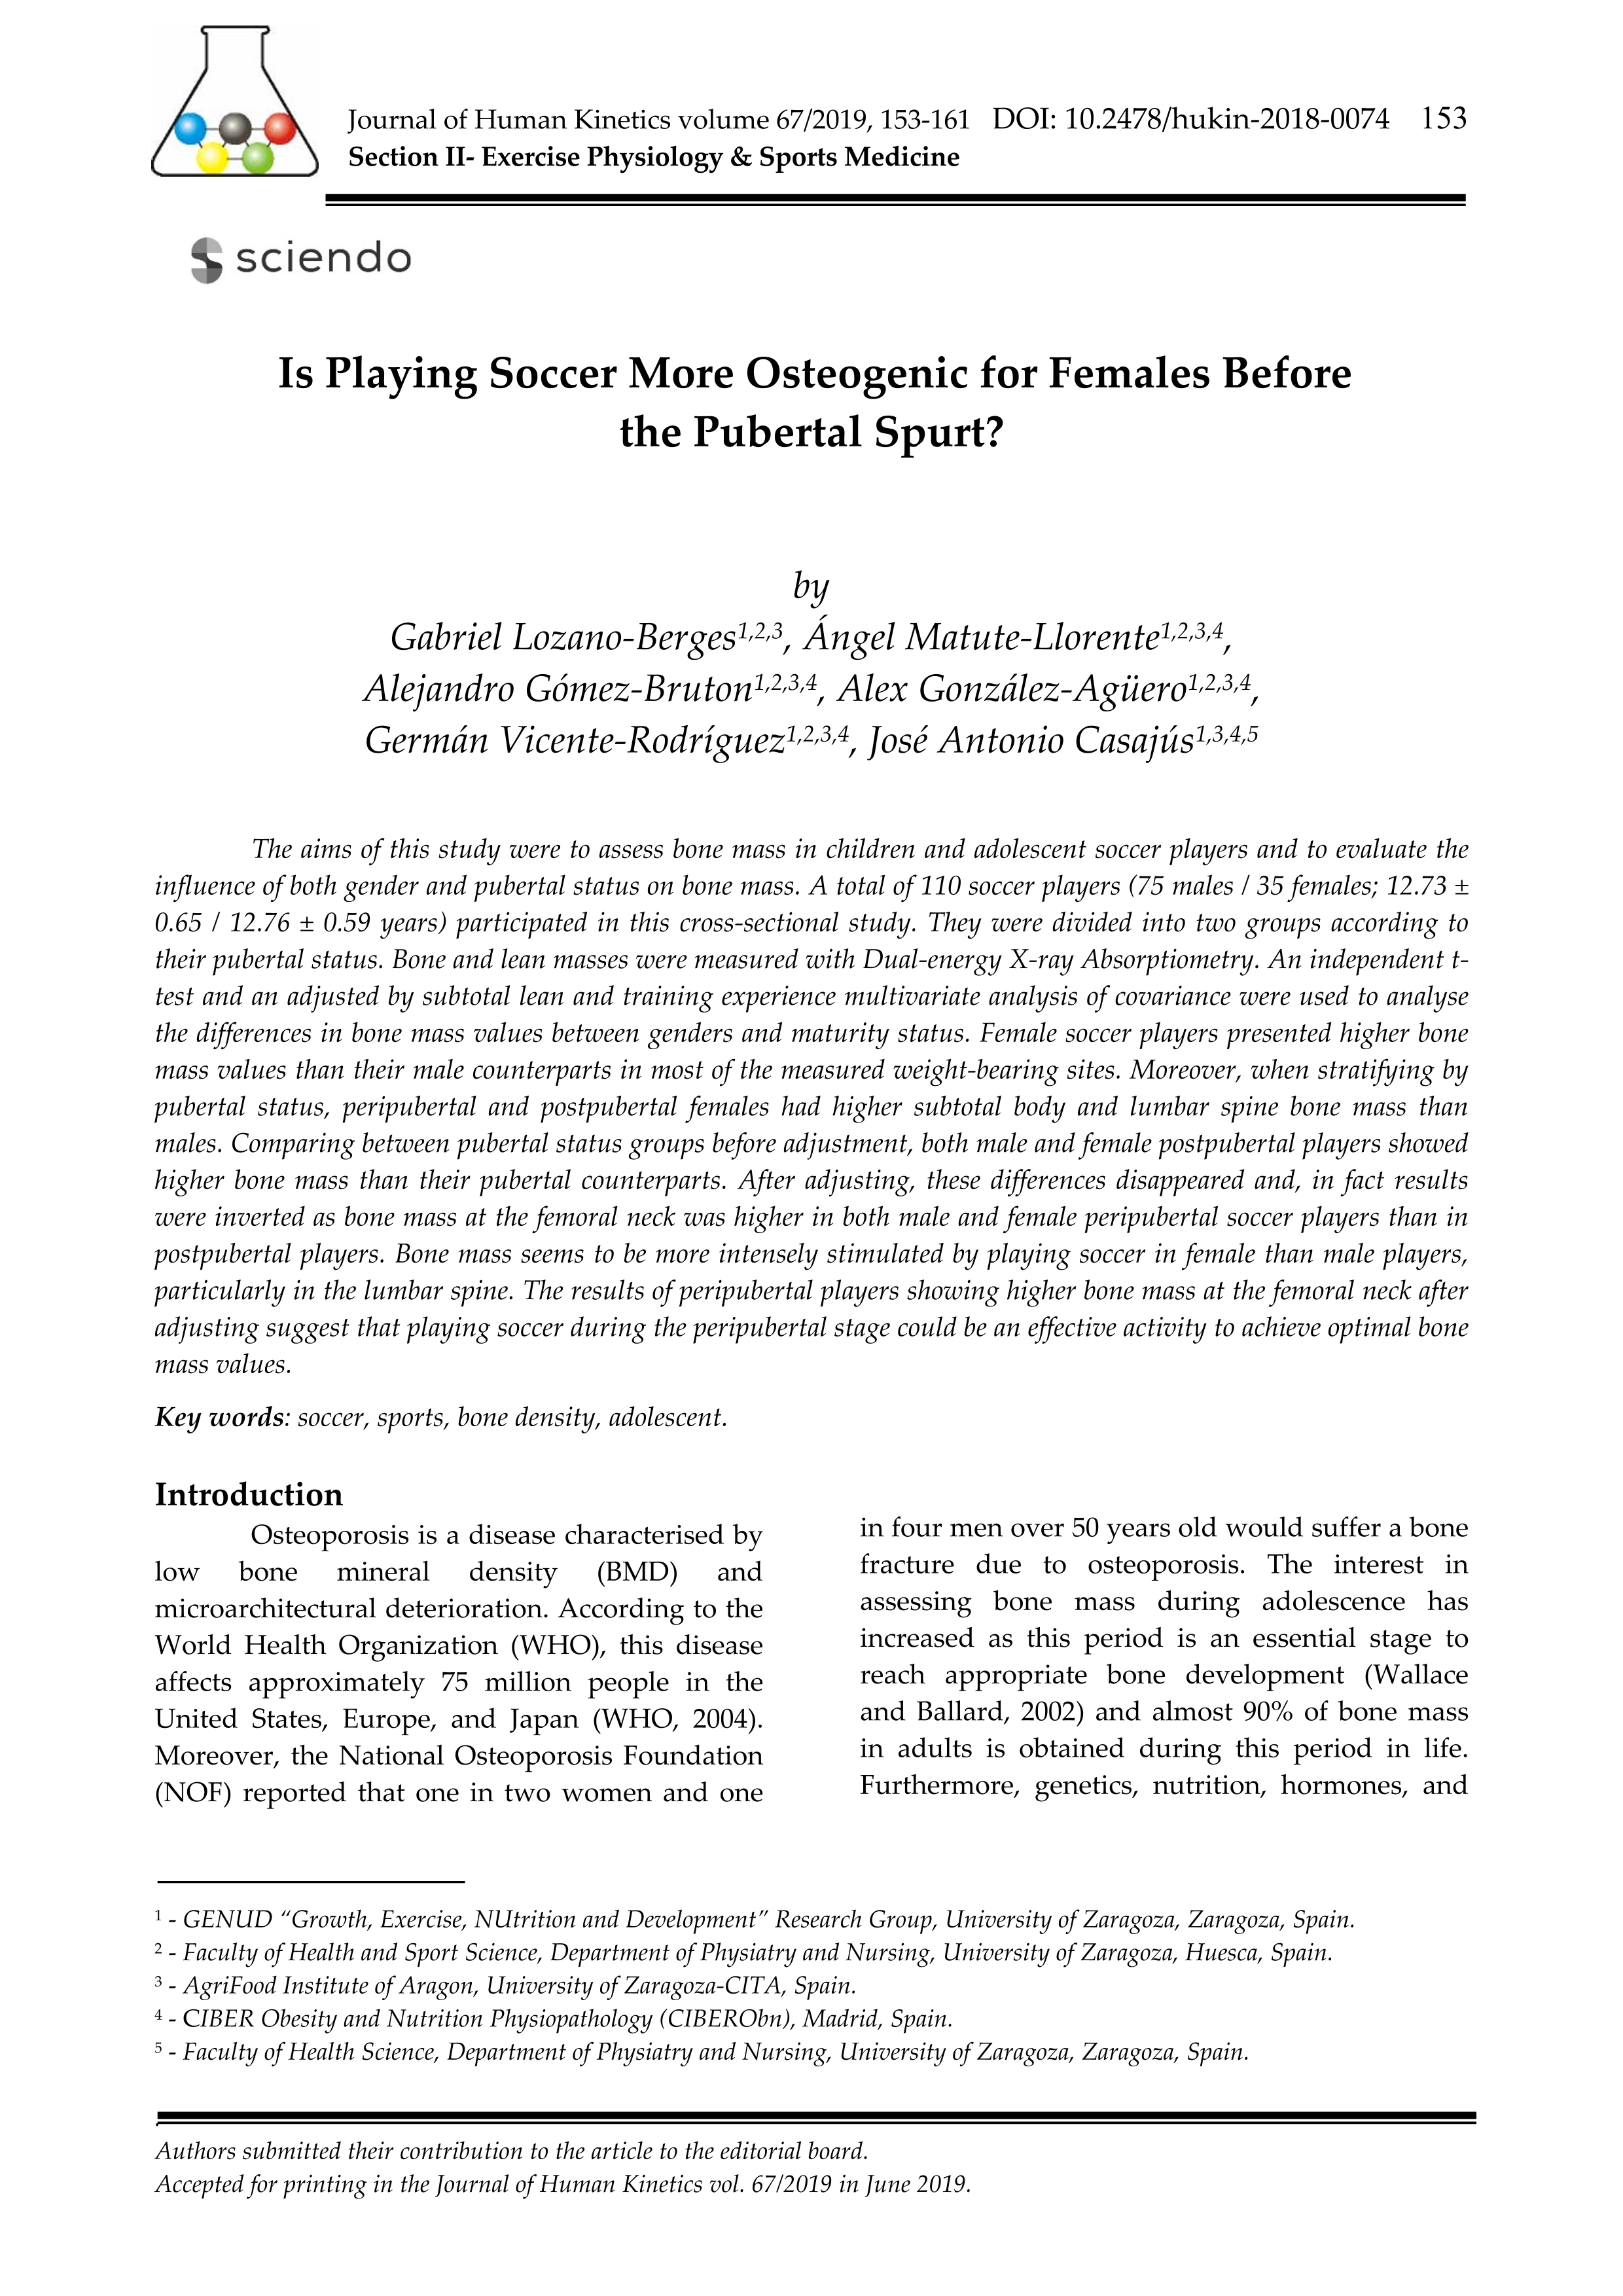 Is Playing Soccer More Osteogenic for Females Before the Pubertal Spurt?